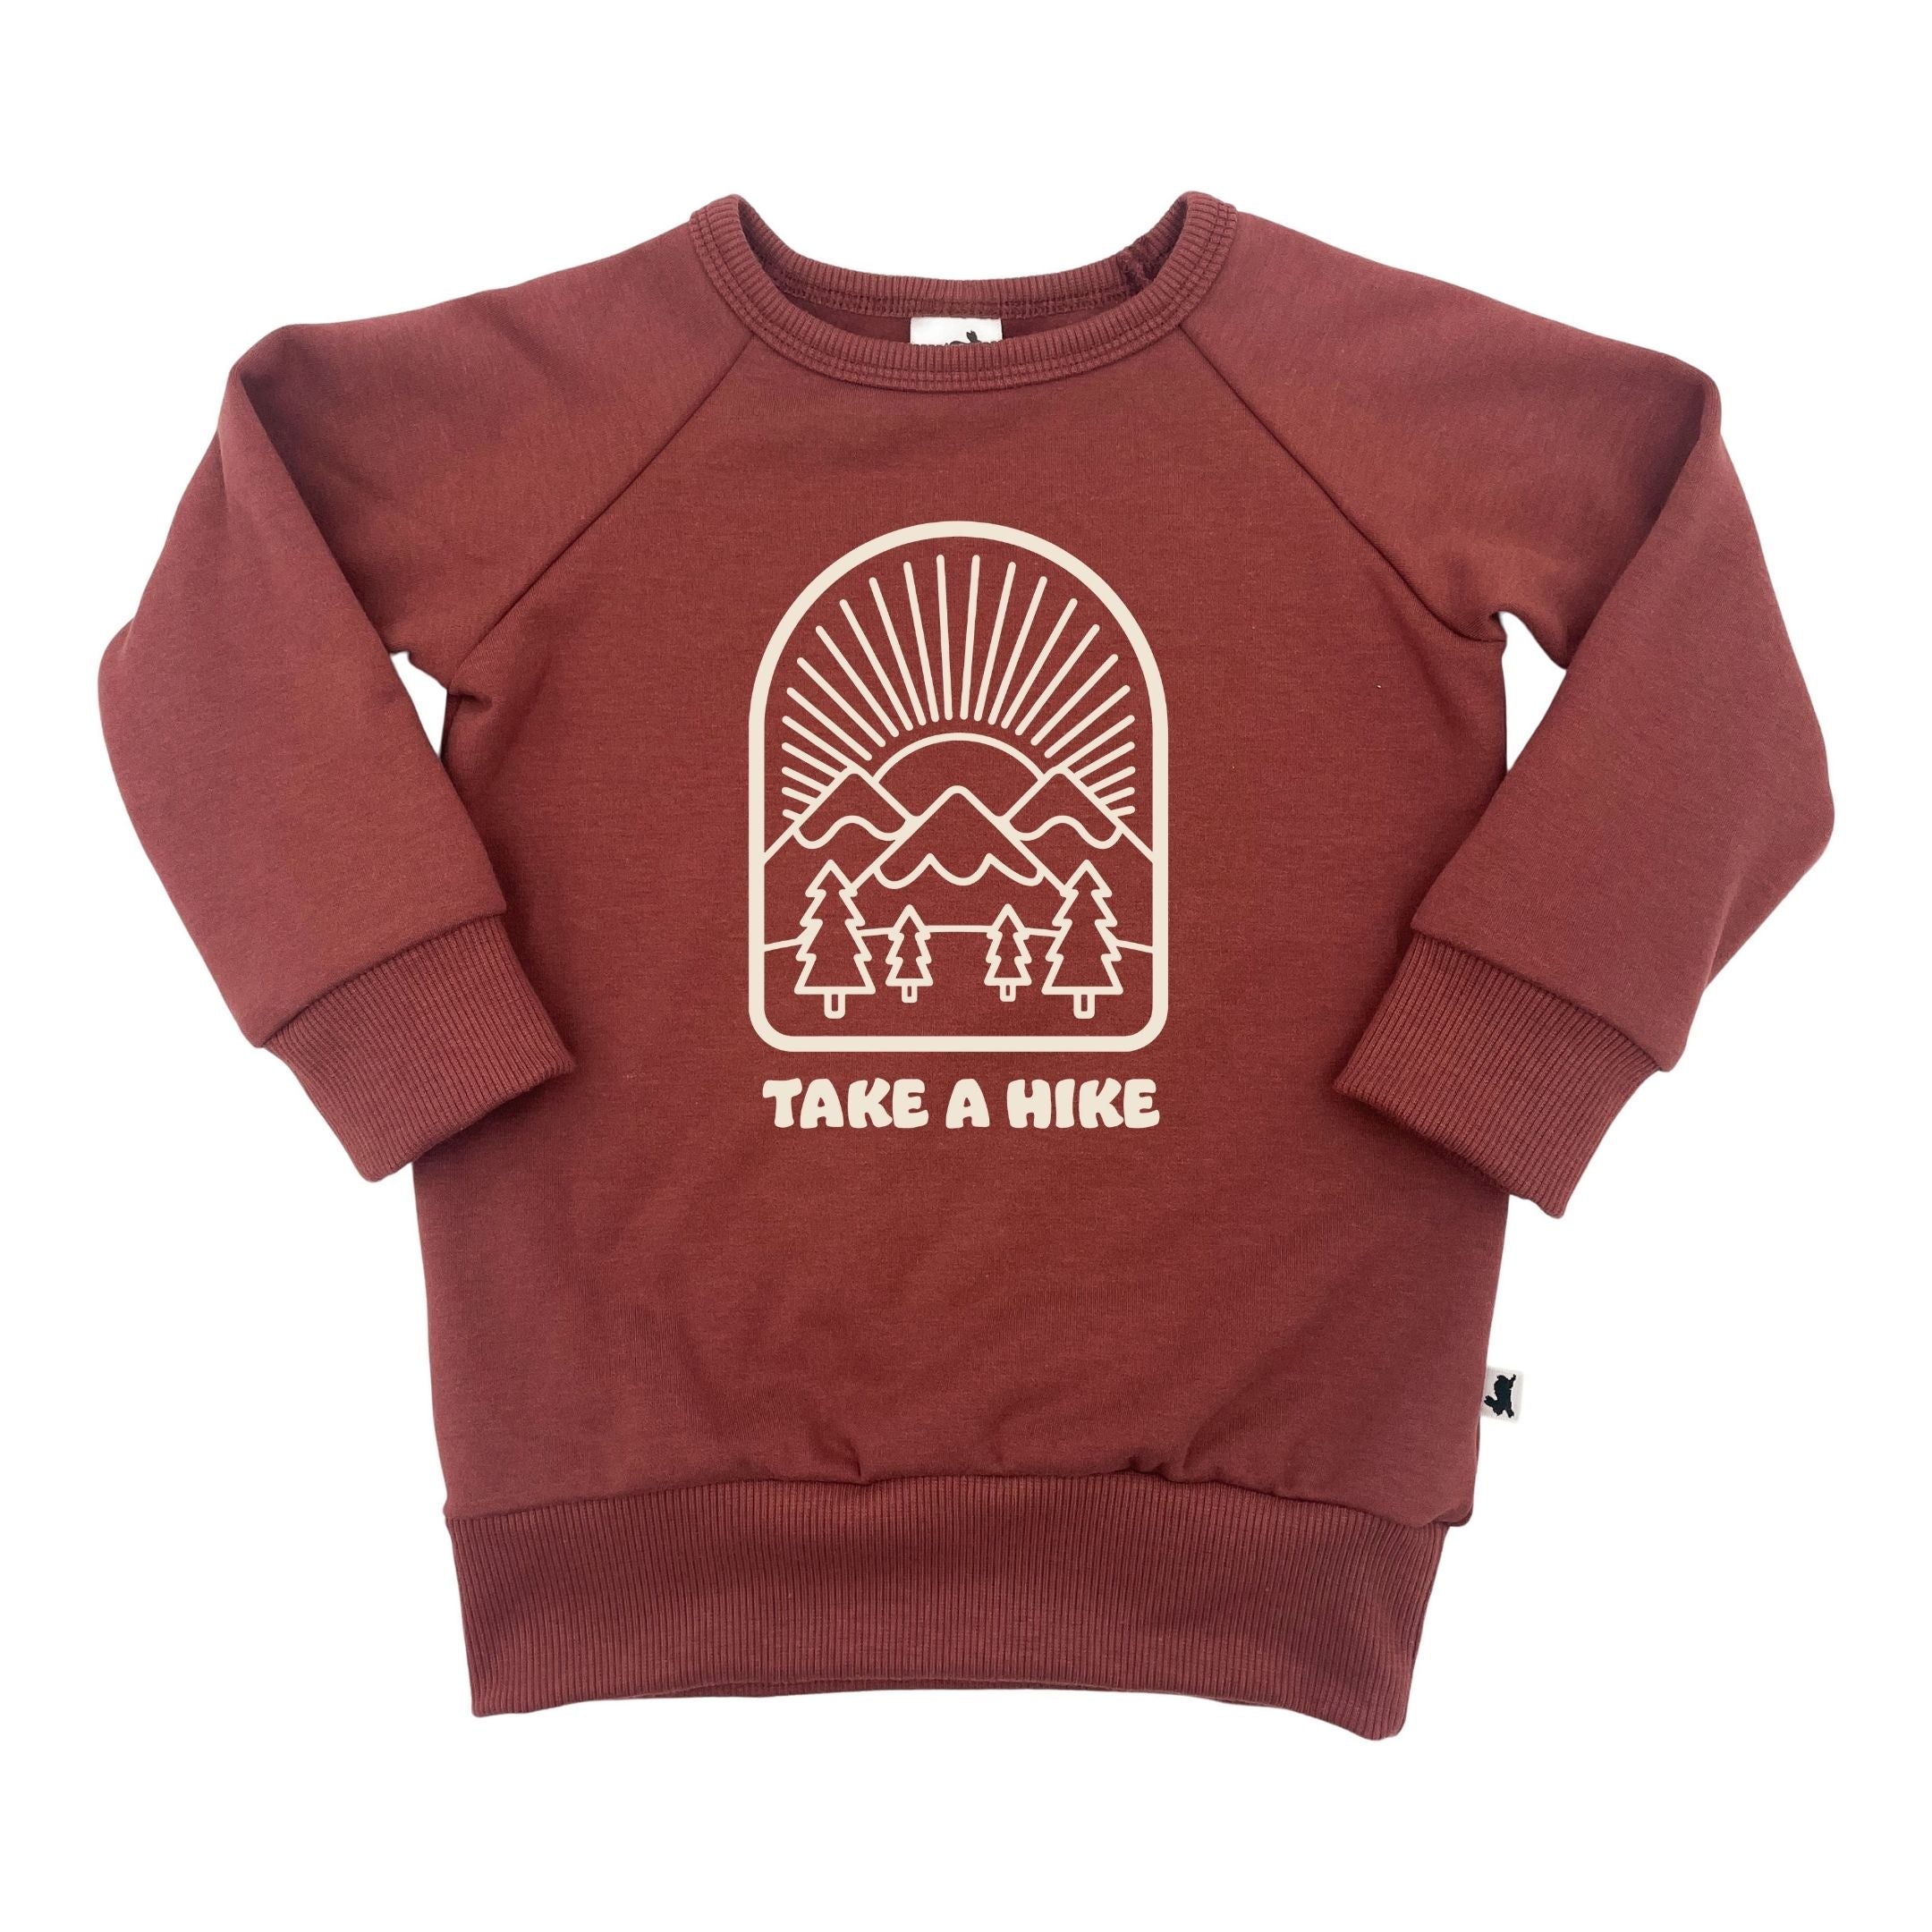 Baby/Kid's/Youth Fleece-Lined 'Take a Hike' Pullover | Burgundy